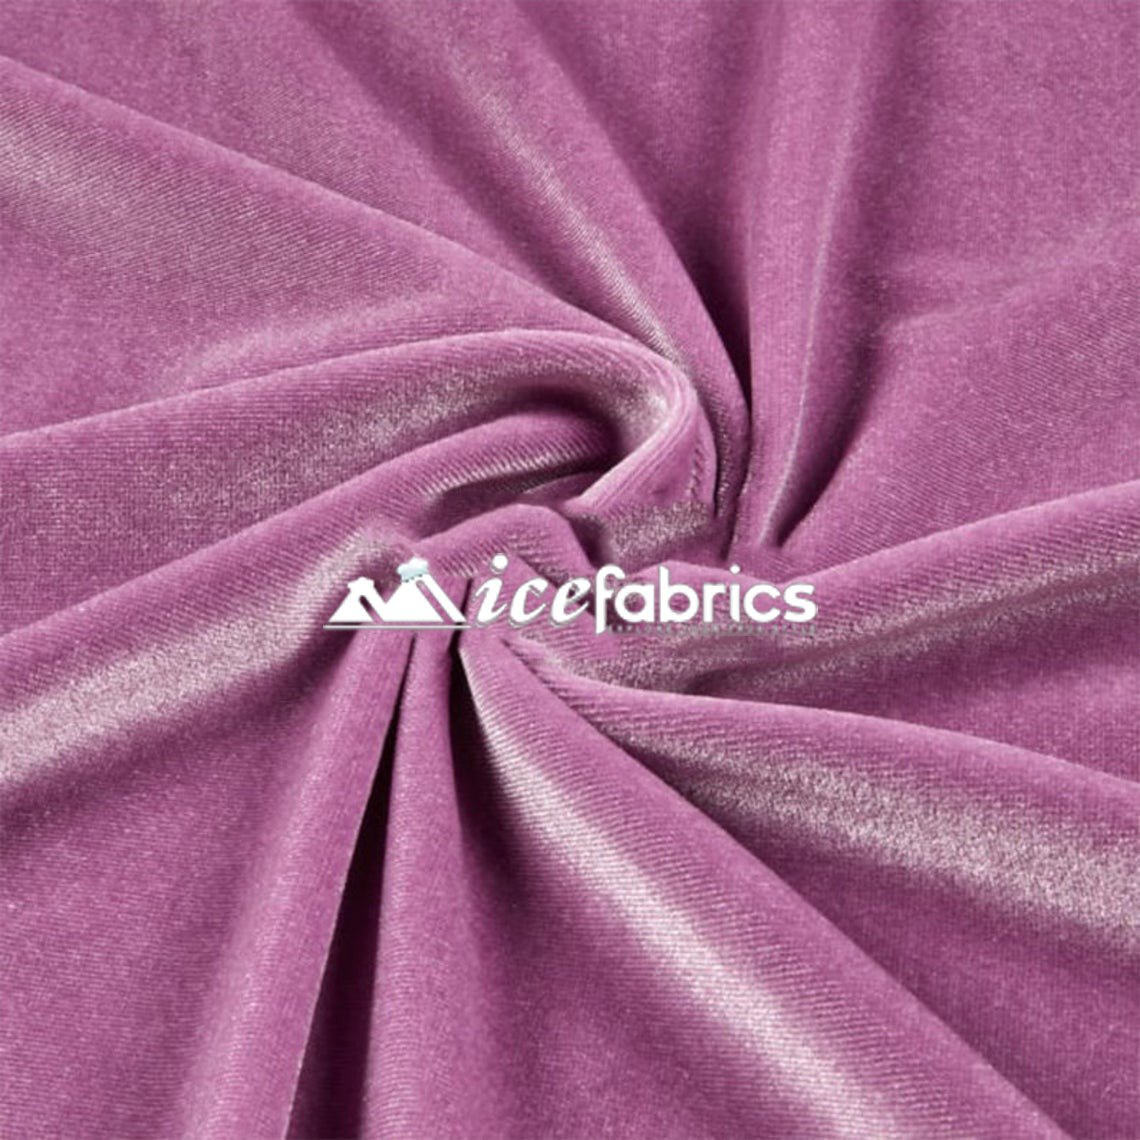 Lilac Velvet Fabric By The Yard | 4 Way StretchVelvet FabricICE FABRICSICE FABRICSBy The Yard (58" Wide)Lilac Velvet Fabric By The Yard | 4 Way Stretch ICE FABRICS